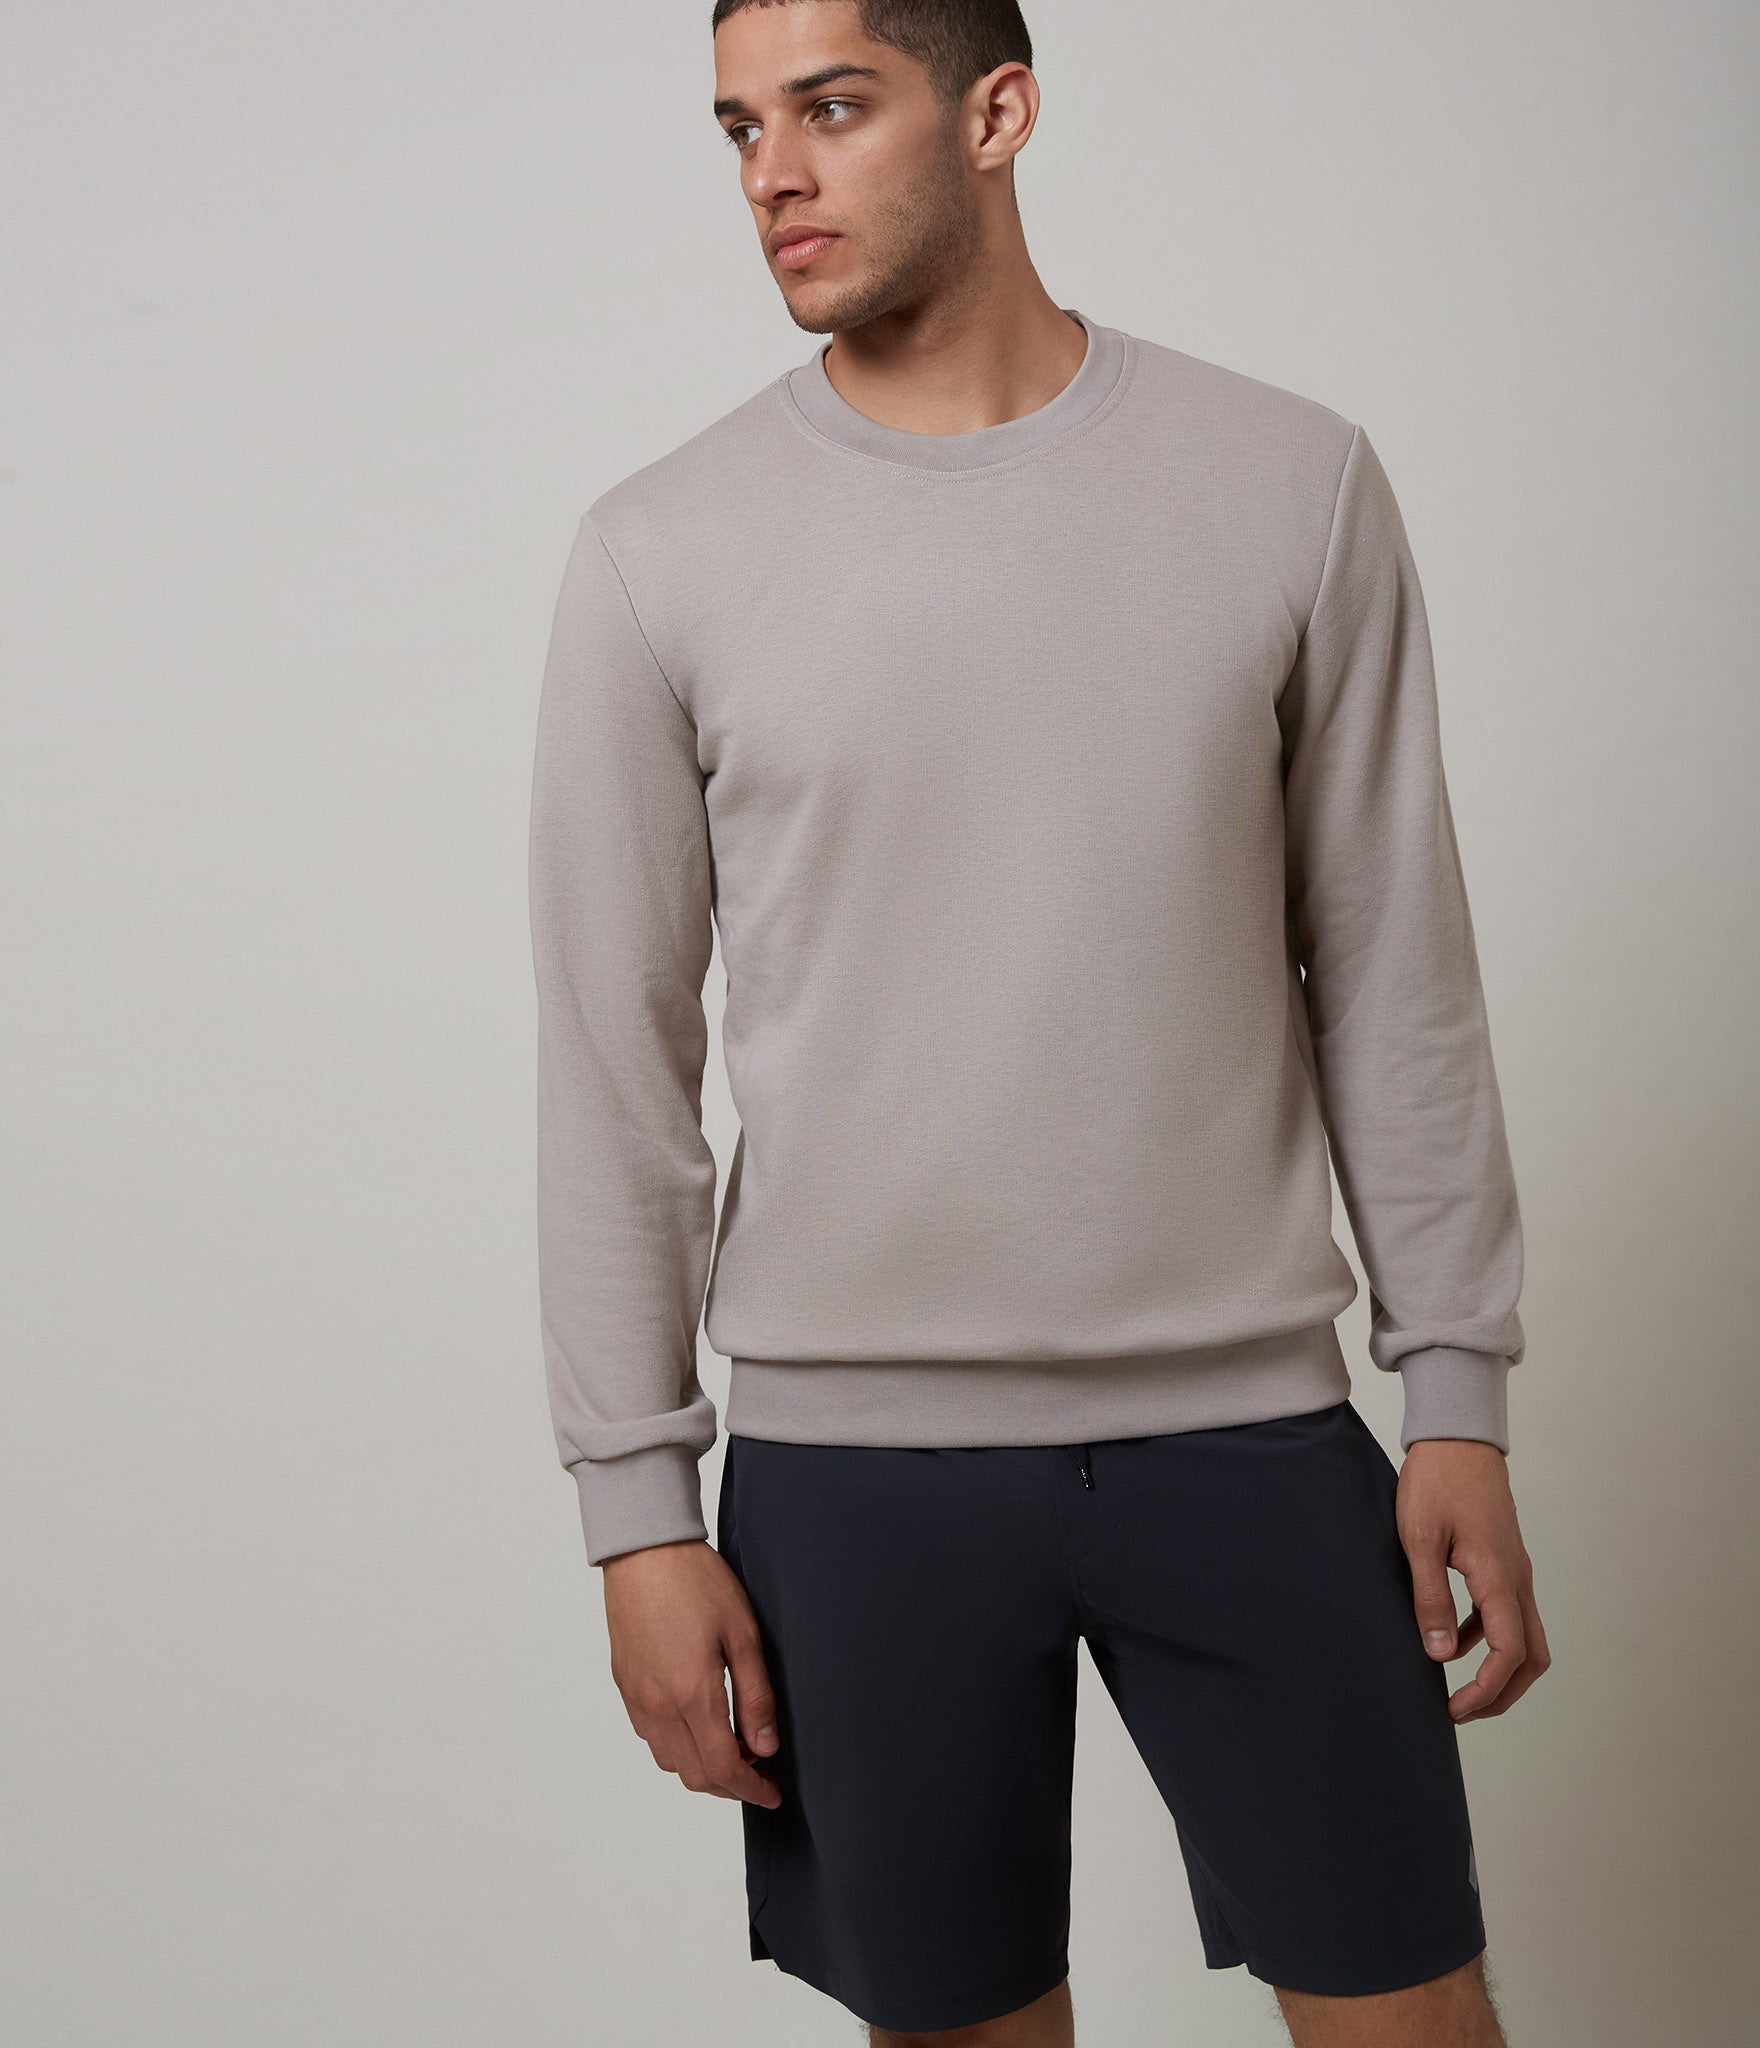 This classic sweatshirt is great for chilly mornings. Tryst Stockholm is a Scandinavian clothing brand for an active urban lifestyle. Tryst means any meeting of special significance, whether public, personal or private, including those all-important meetings with oneself.